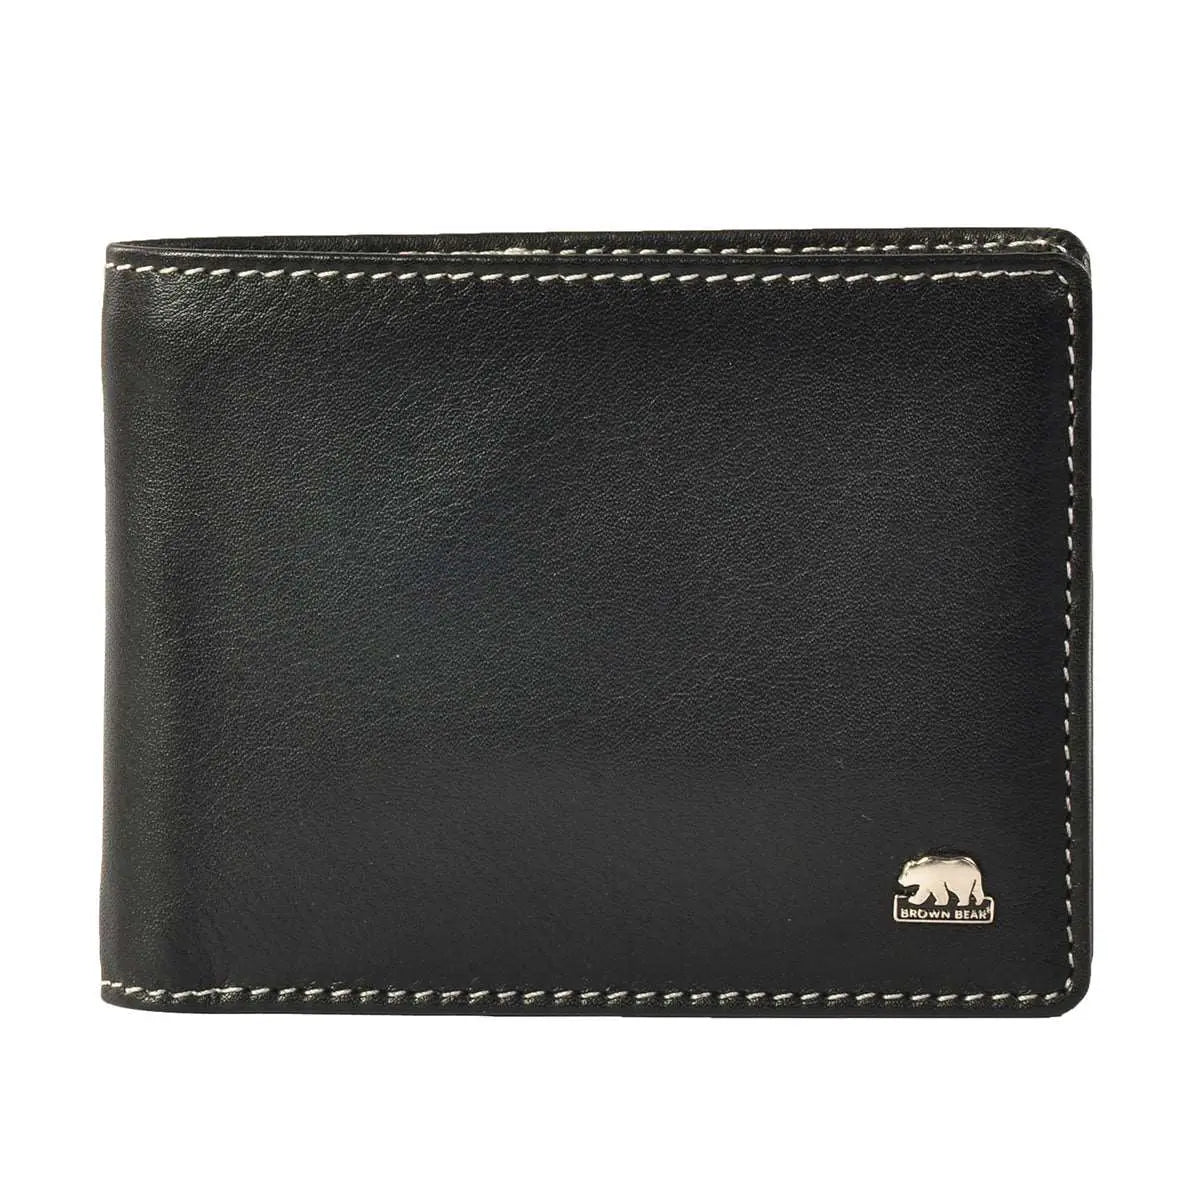 Buy ARFA Classic Artificial Leather White Wallets for Men at Amazon.in